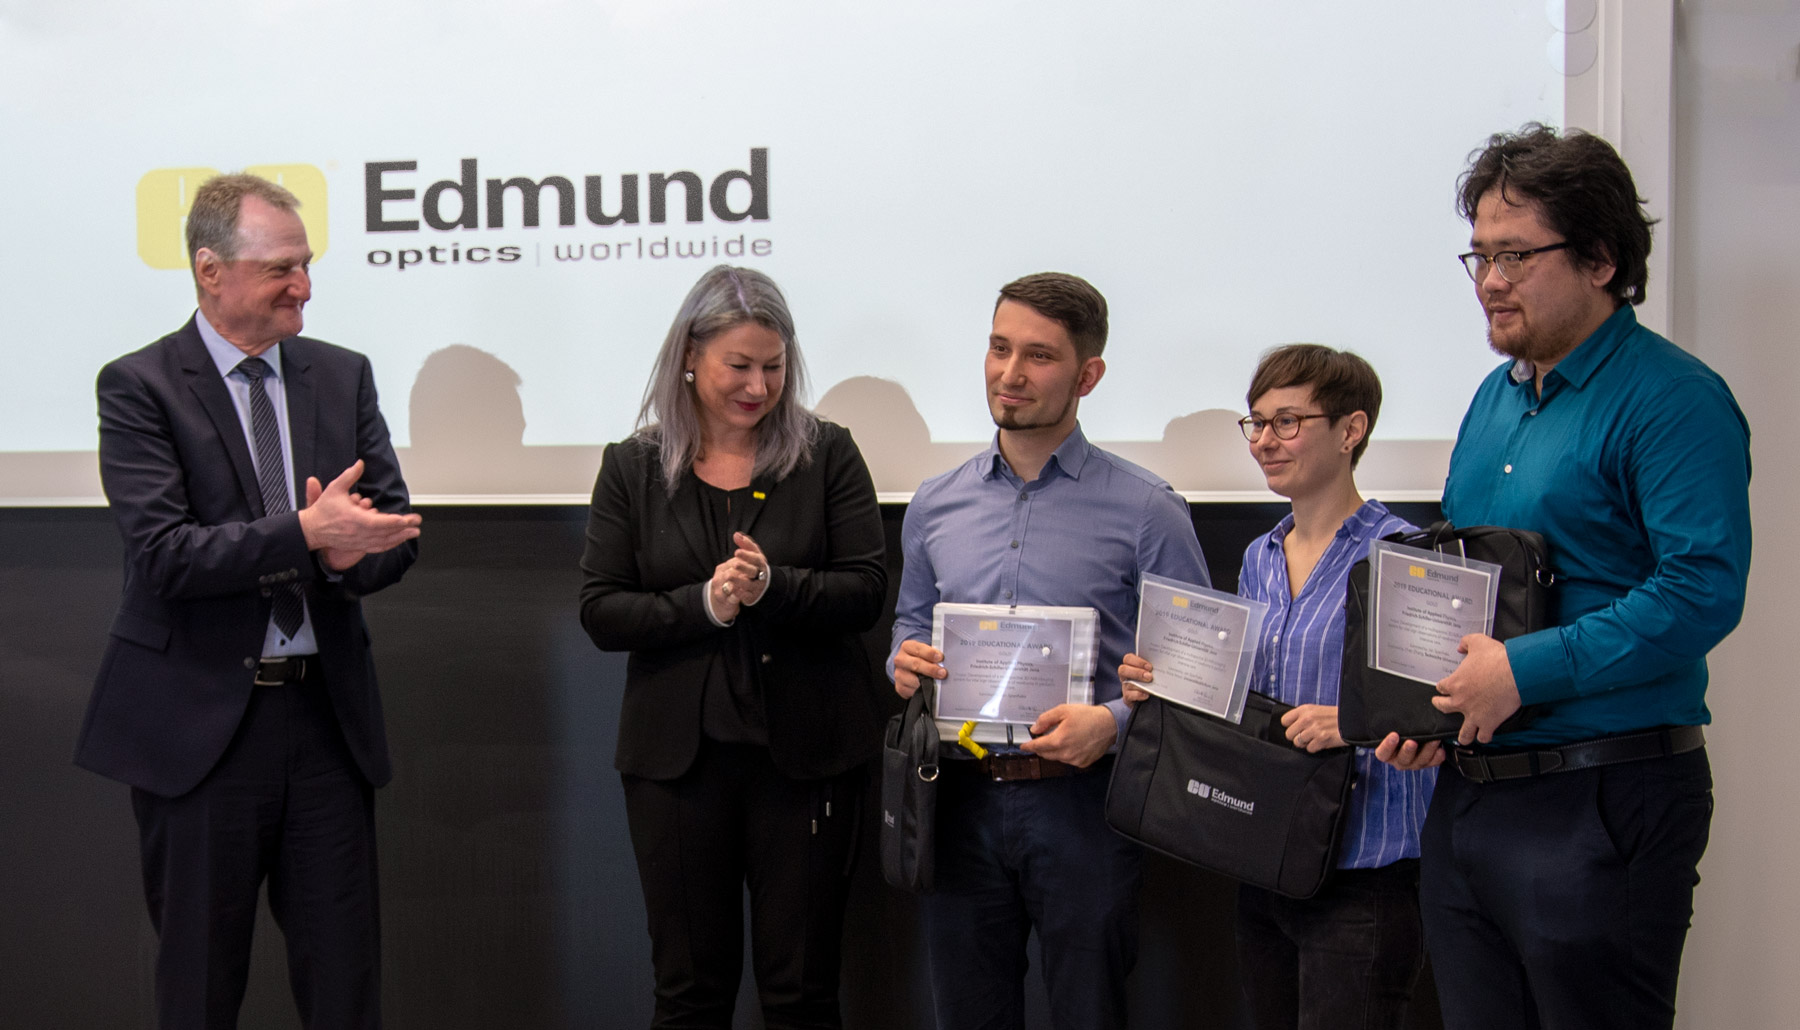 Jan Sperrhake (Friedrich Schiller University Jena) and his team members Chen Zhang (Technical University Ilmenau) and Maria Nisser (University Hospital Jena) receiving the Edmund Optics Educational Award in the category &quot;Gold&quot;.